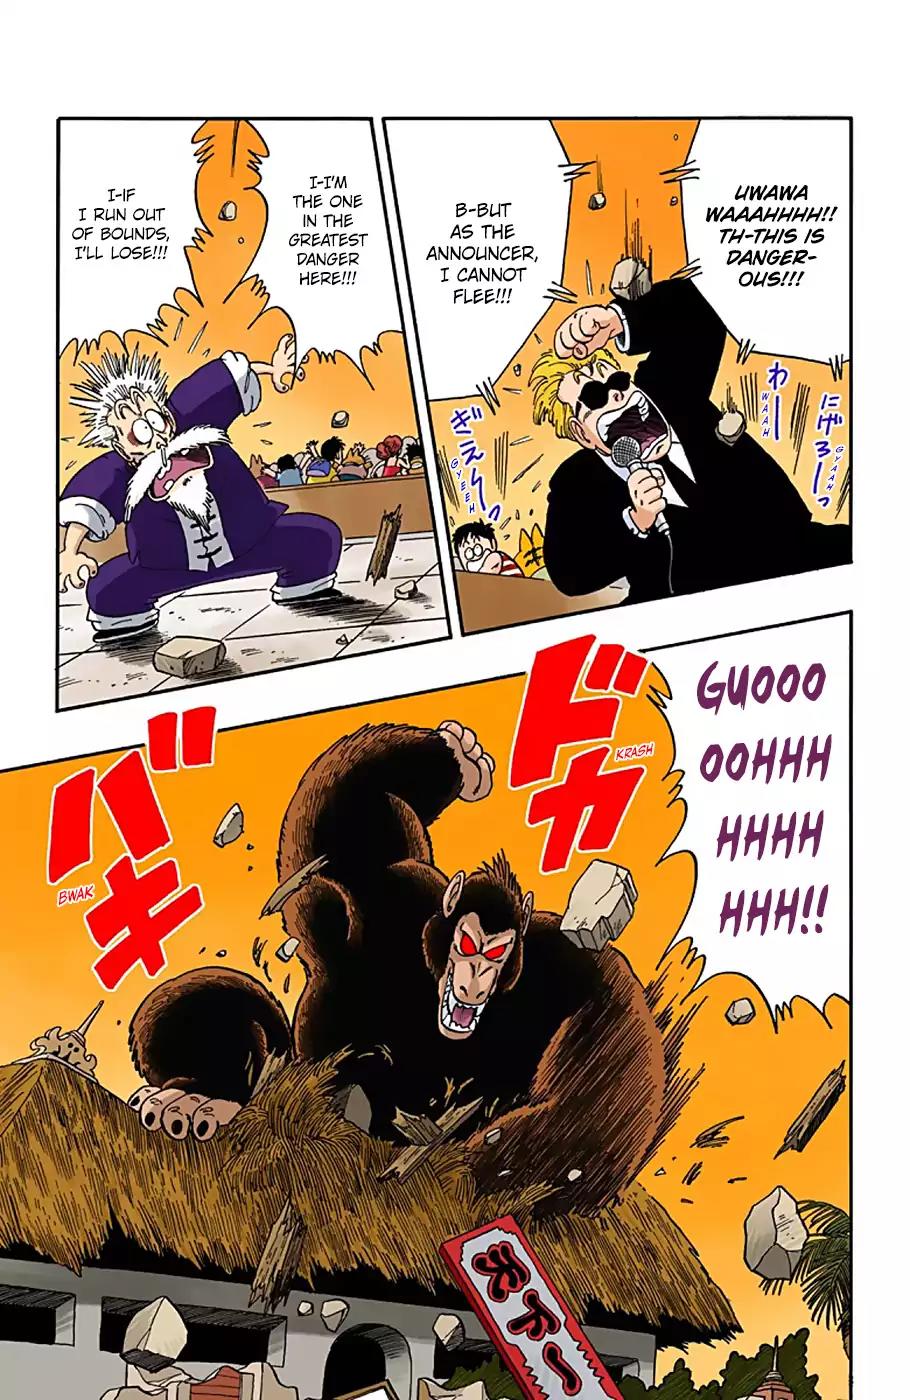 Dragon Ball - Full Color Vol.4 Chapter 51: